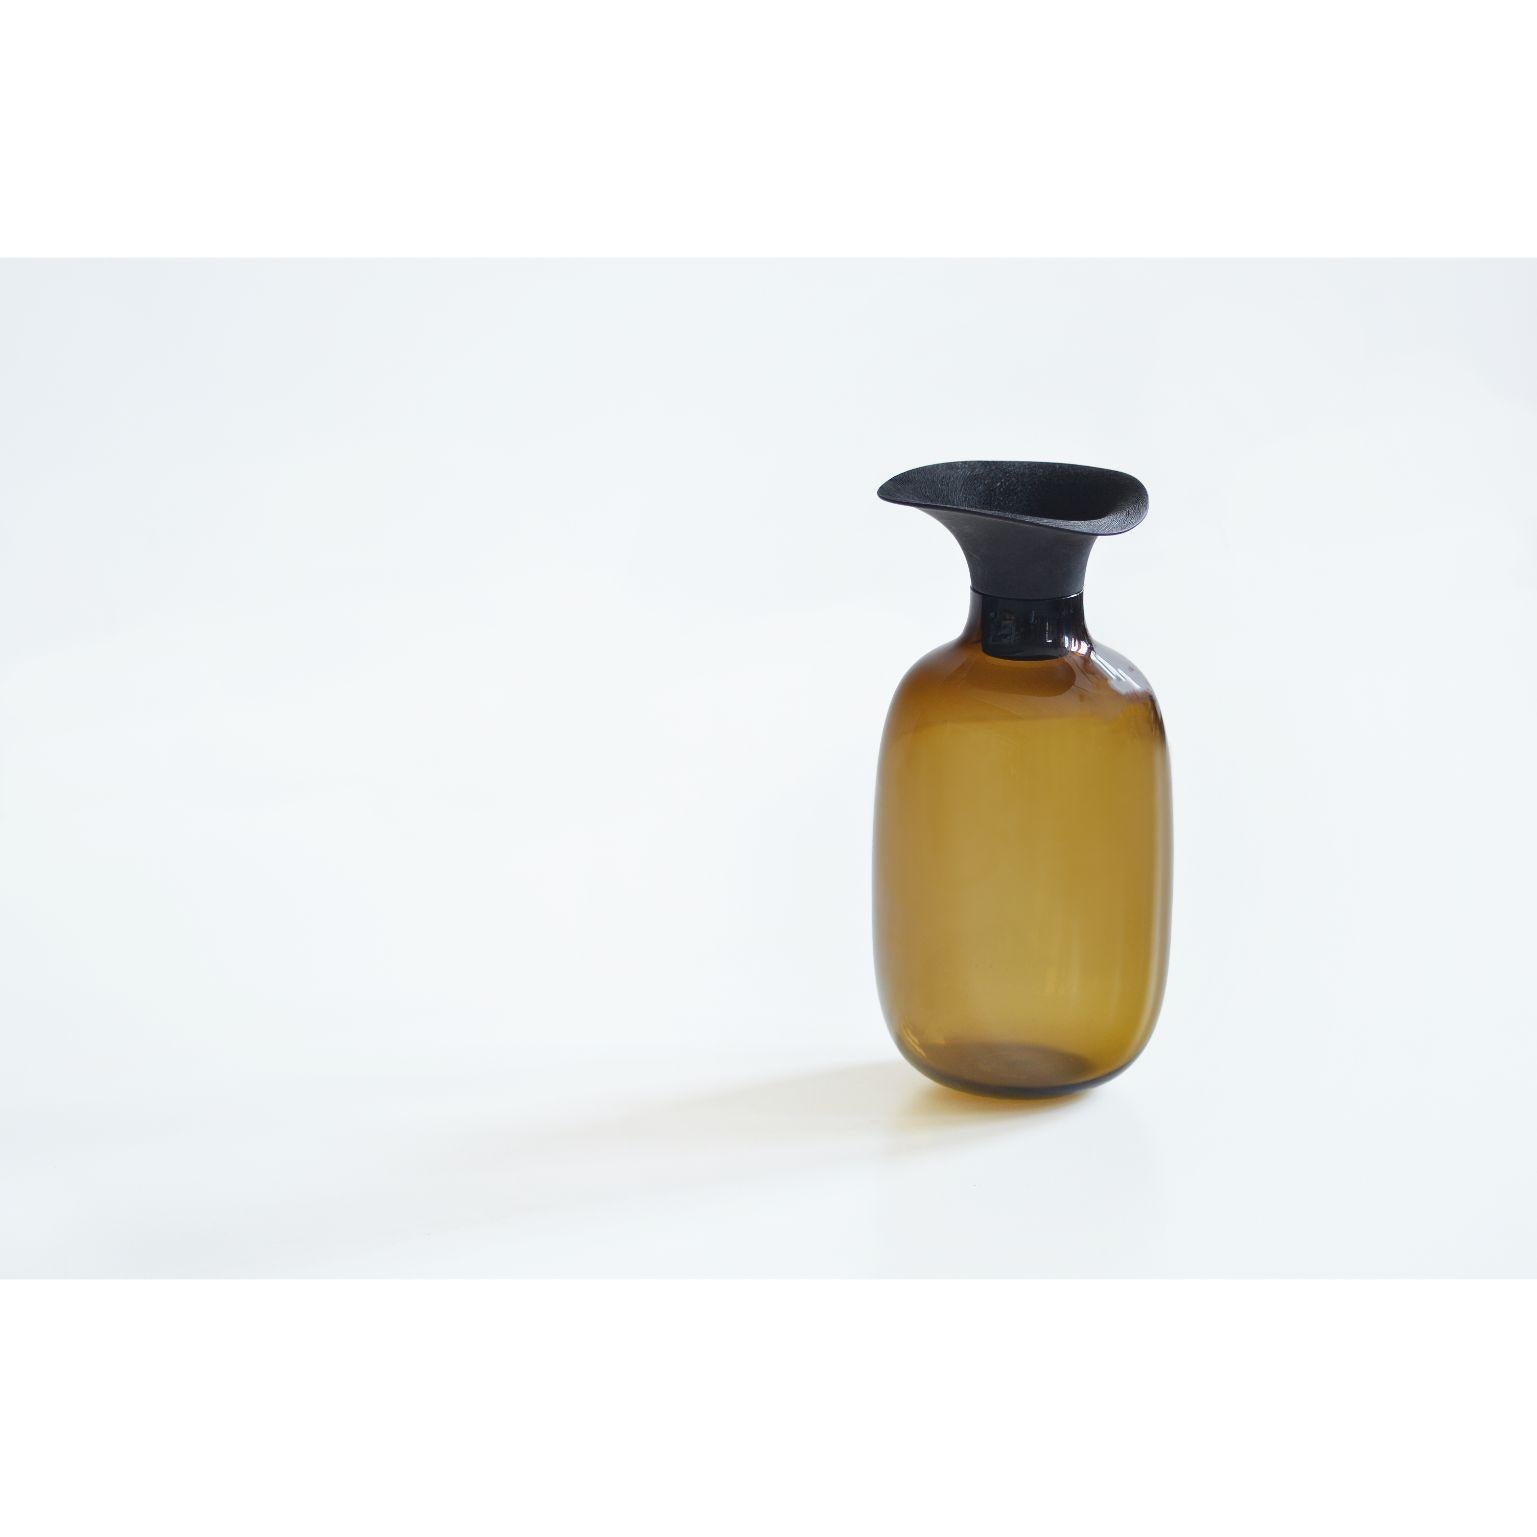 Vieno bottle - Medium by Antrei Hartikainen
Materials: Glass, linden wood, black stain & natural oil wax
Dimensions: 
Width 20cm
Depth 20cm
Height 28cm
Bottle diameter 20 cm

Limited Edition

  

Vieno combine delicate and shiny glass as